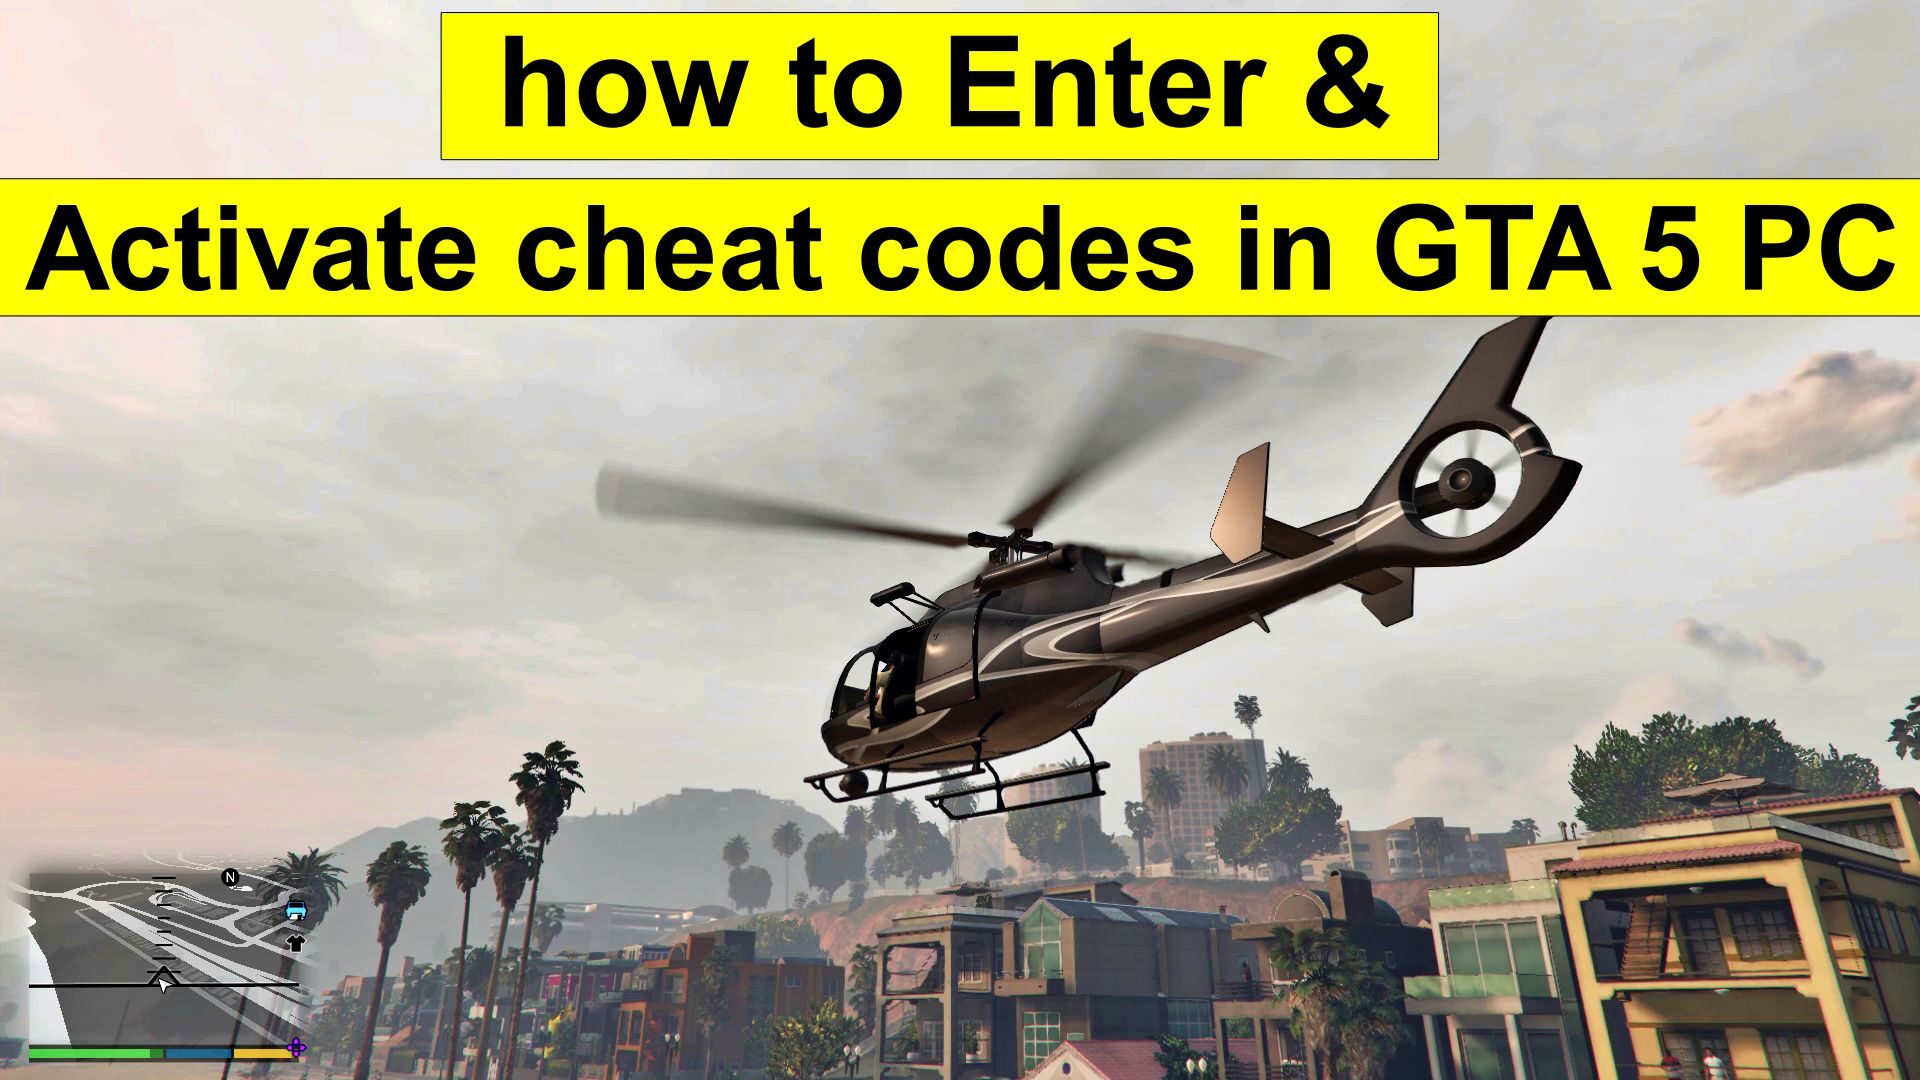 Enter & Activate cheats in GTA 5 PC